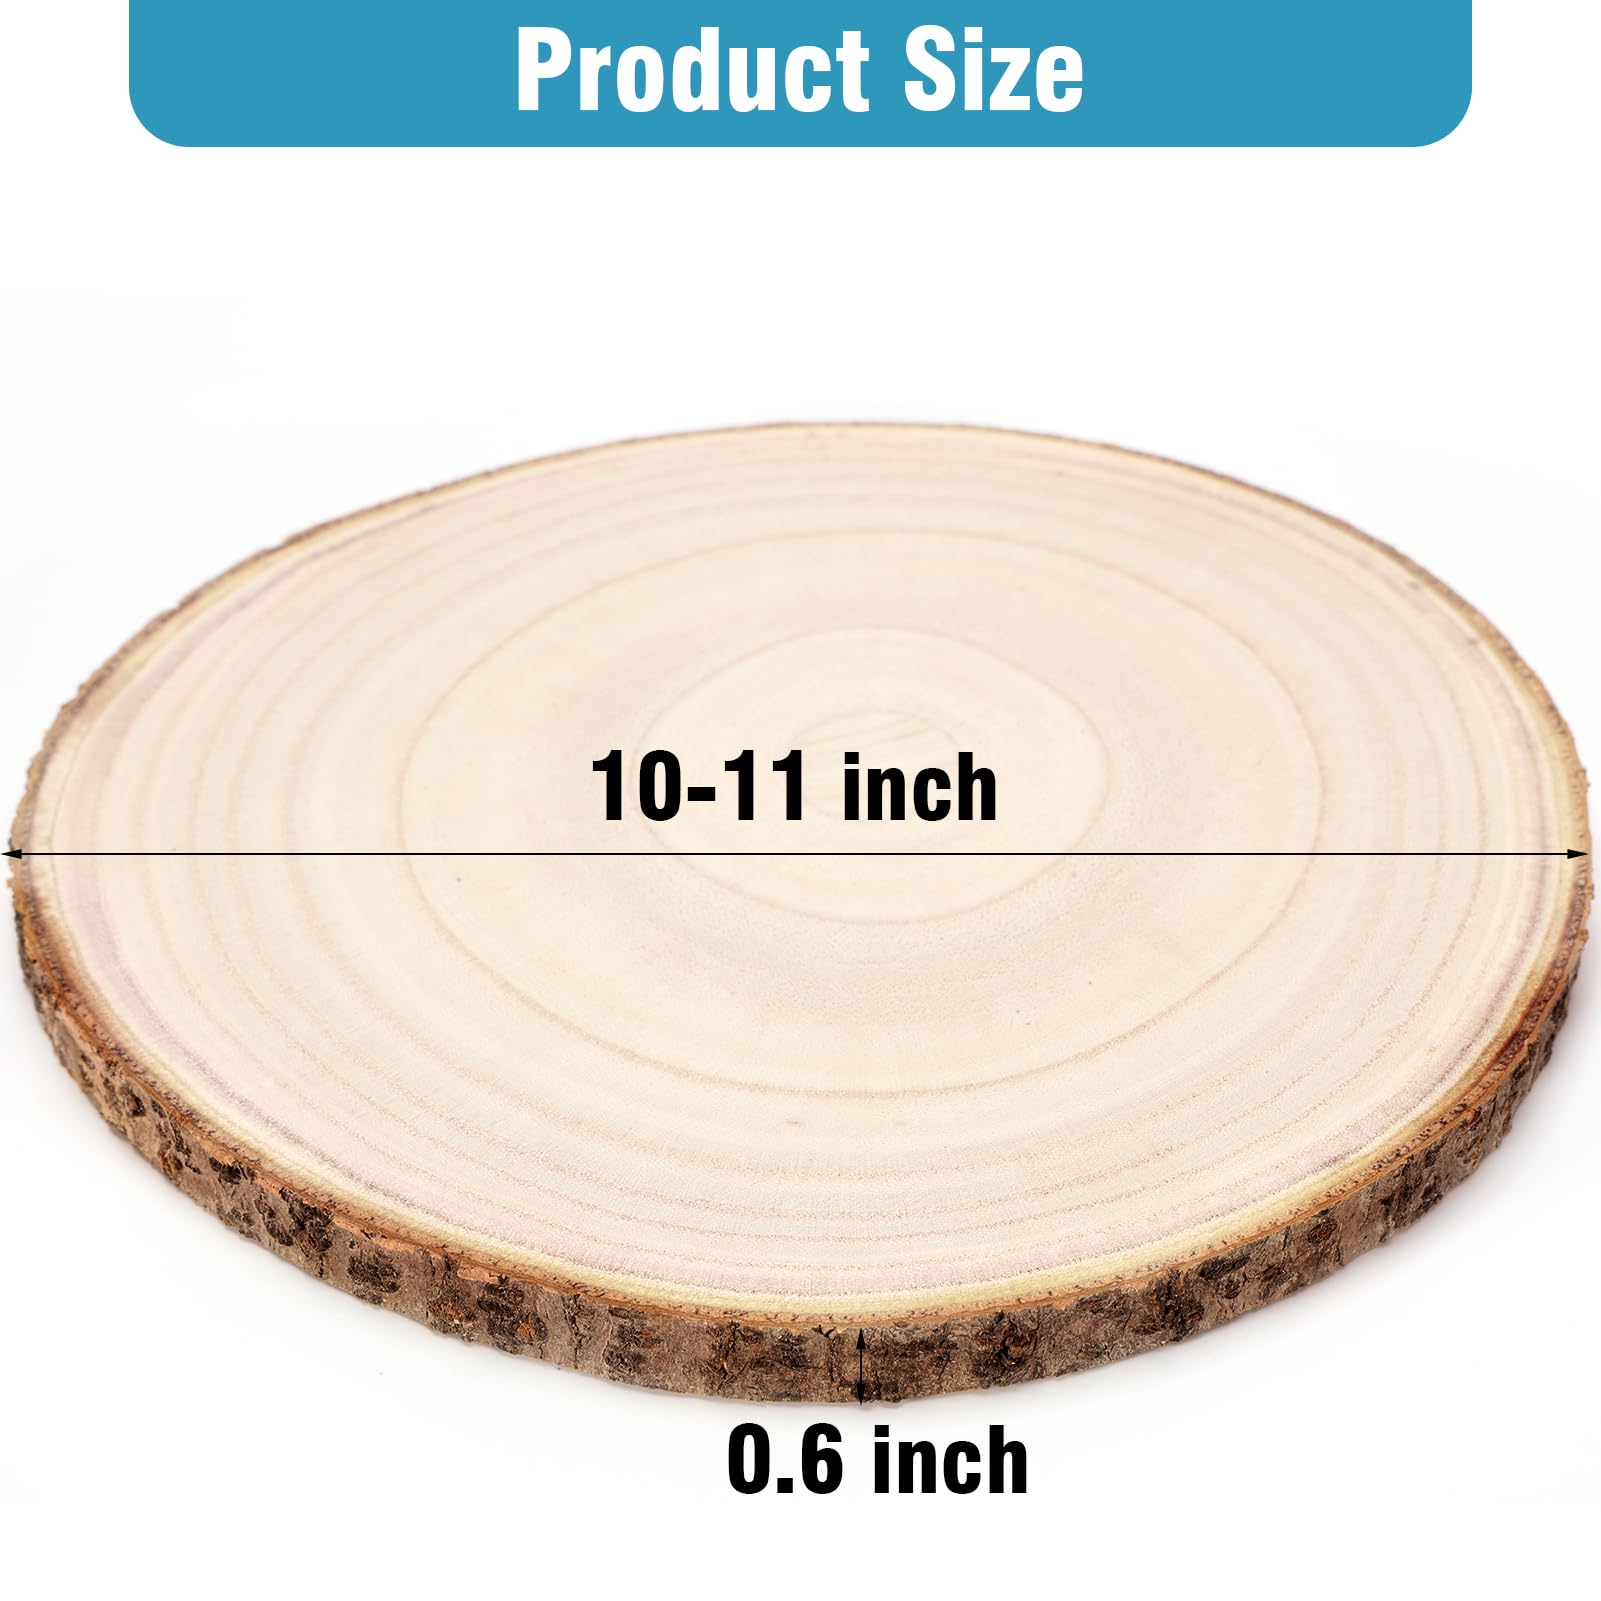 Caydo 4 Piece 10-11 Inch Wood Centerpieces for Tables, Large Wood Slices for Centerpieces for Wedding Table Decoration, Candy Bar, Party, and DIY Projects